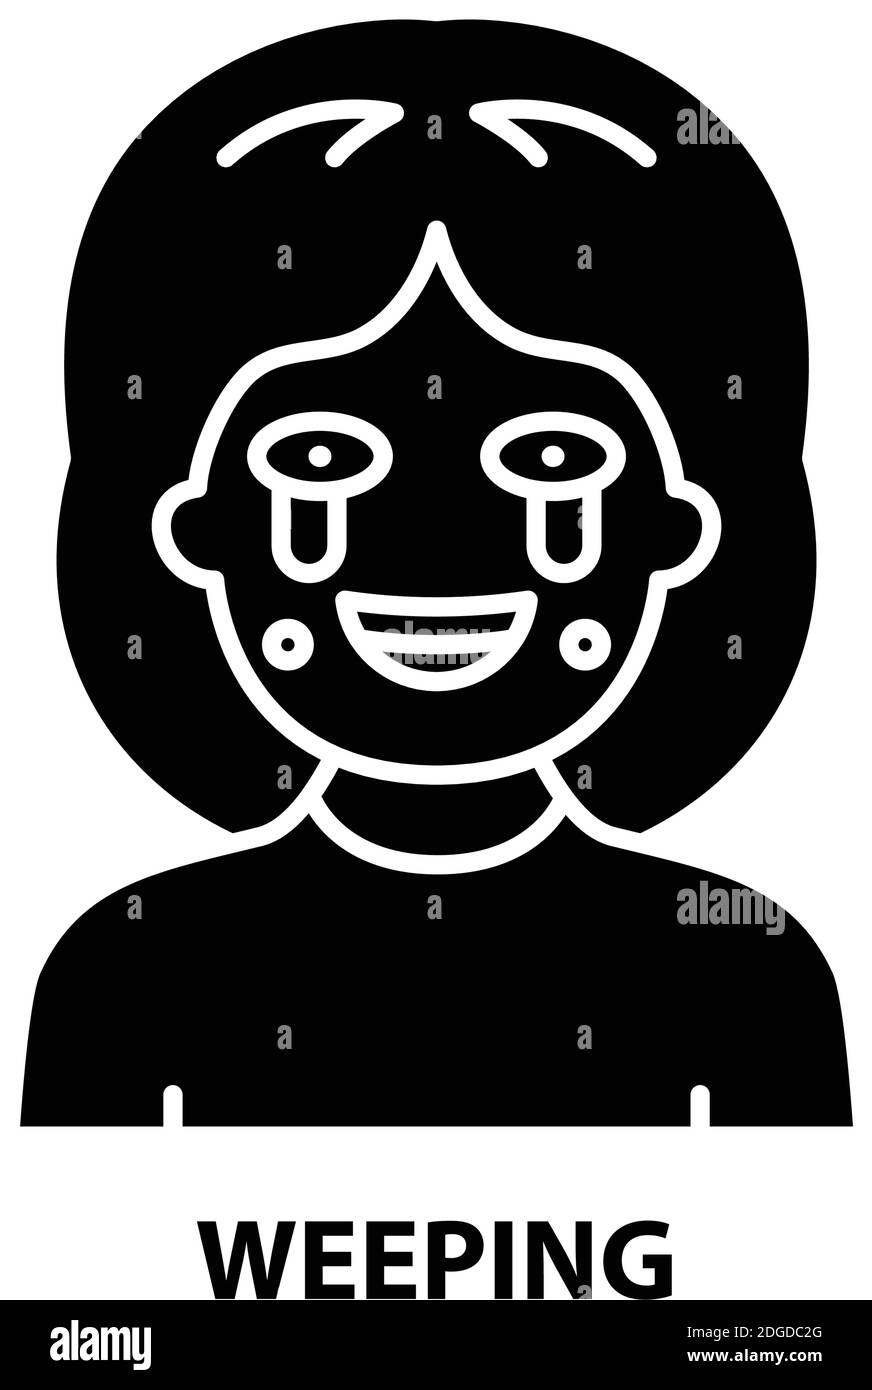 weeping icon, black vector sign with editable strokes, concept illustration Stock Vector